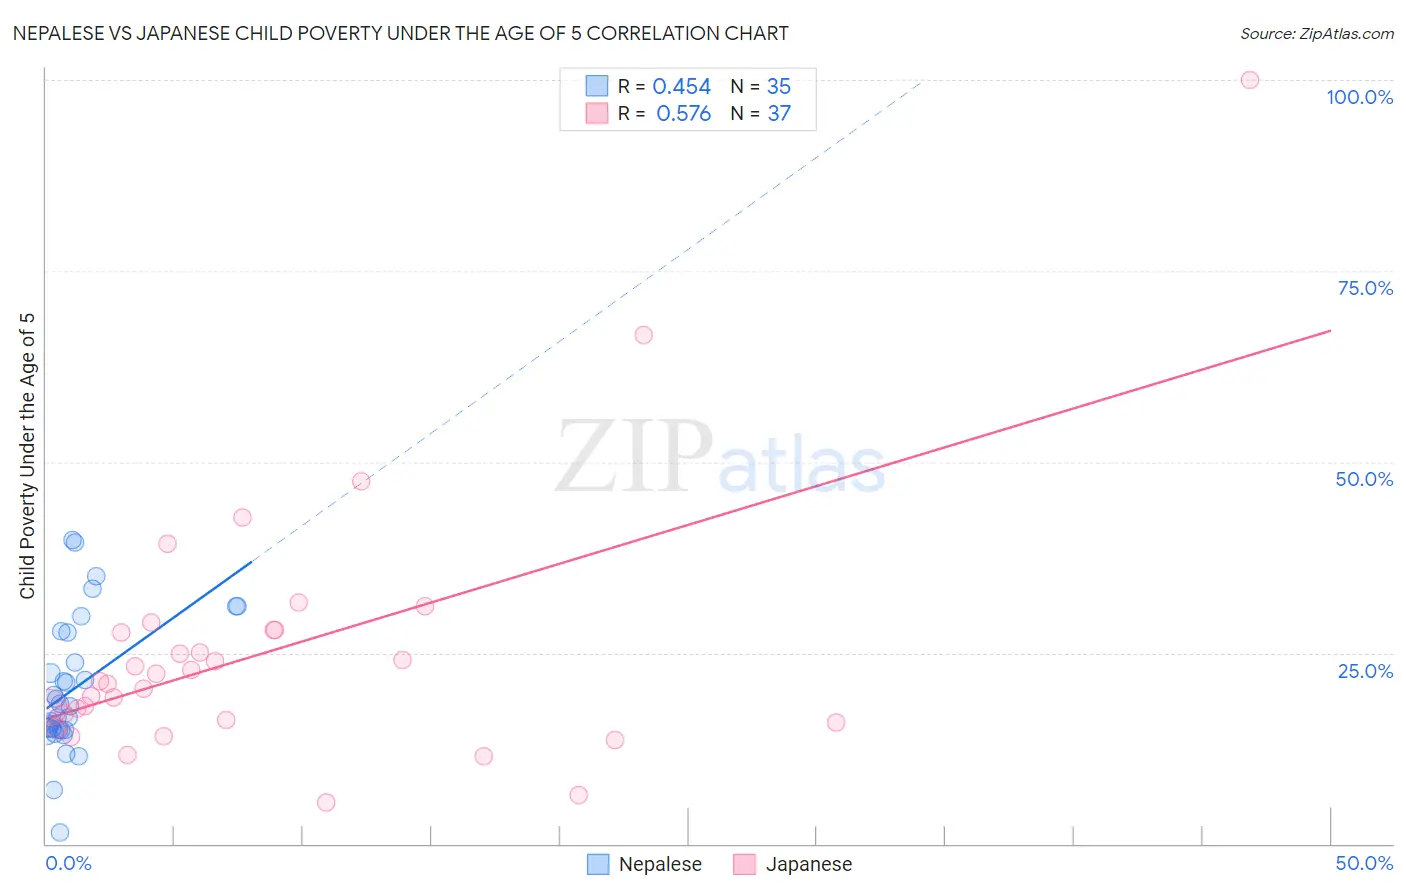 Nepalese vs Japanese Child Poverty Under the Age of 5